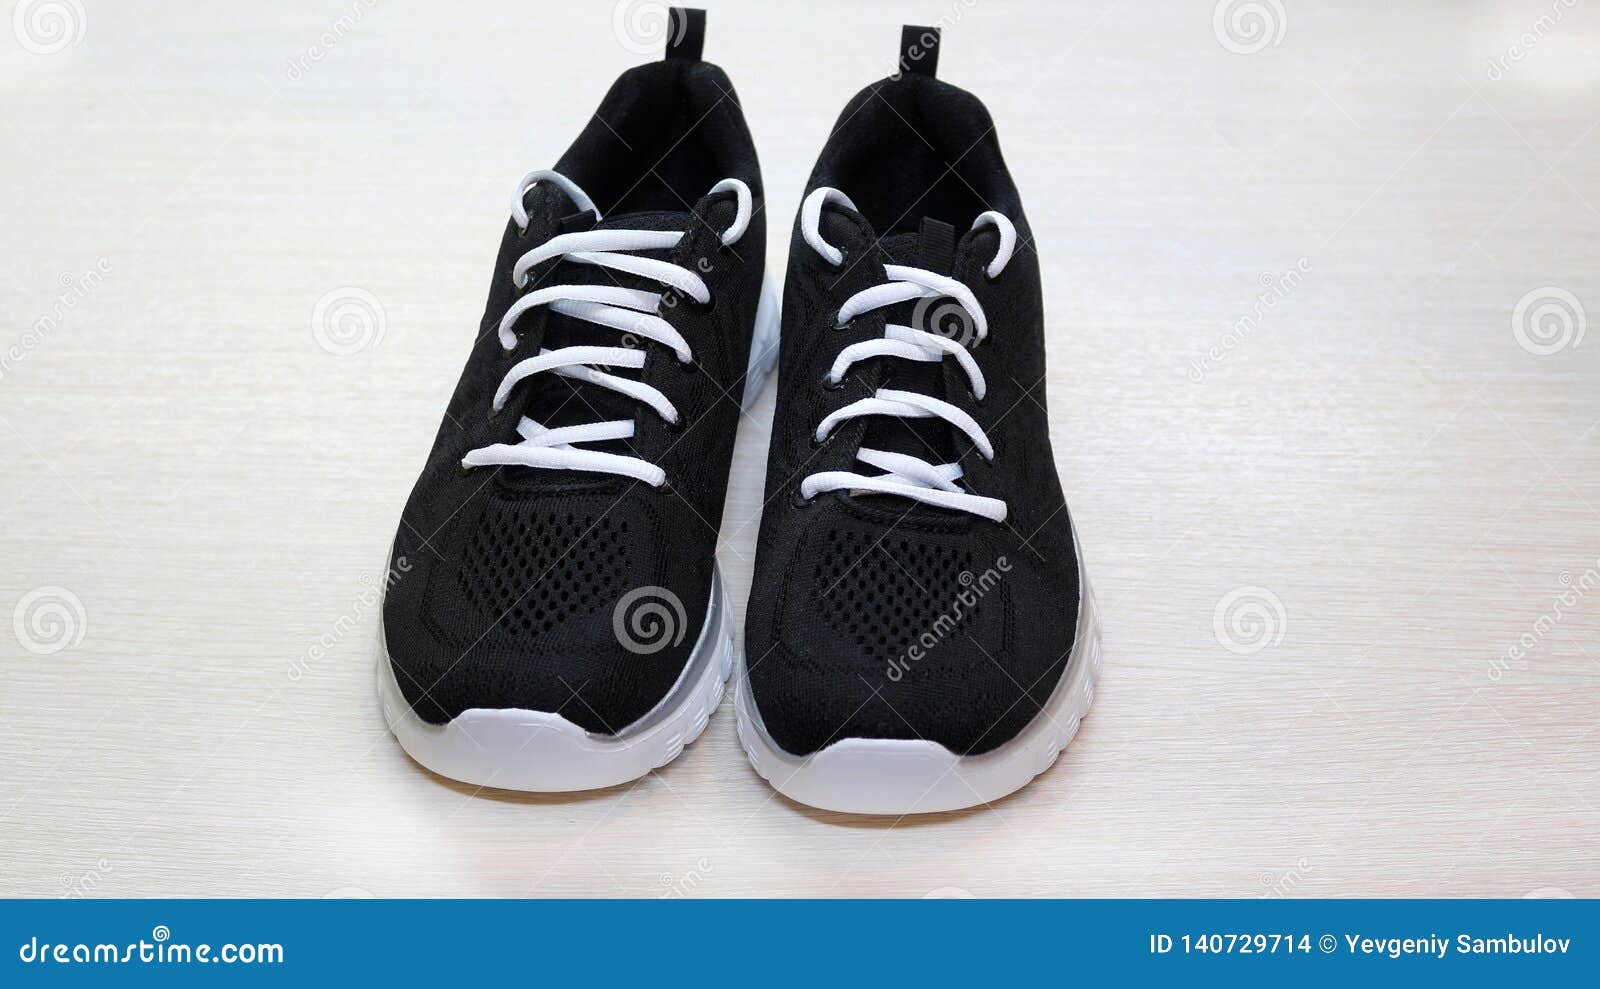 Black Sport Unisex Sneakers with White Sole and White Laces on White ...